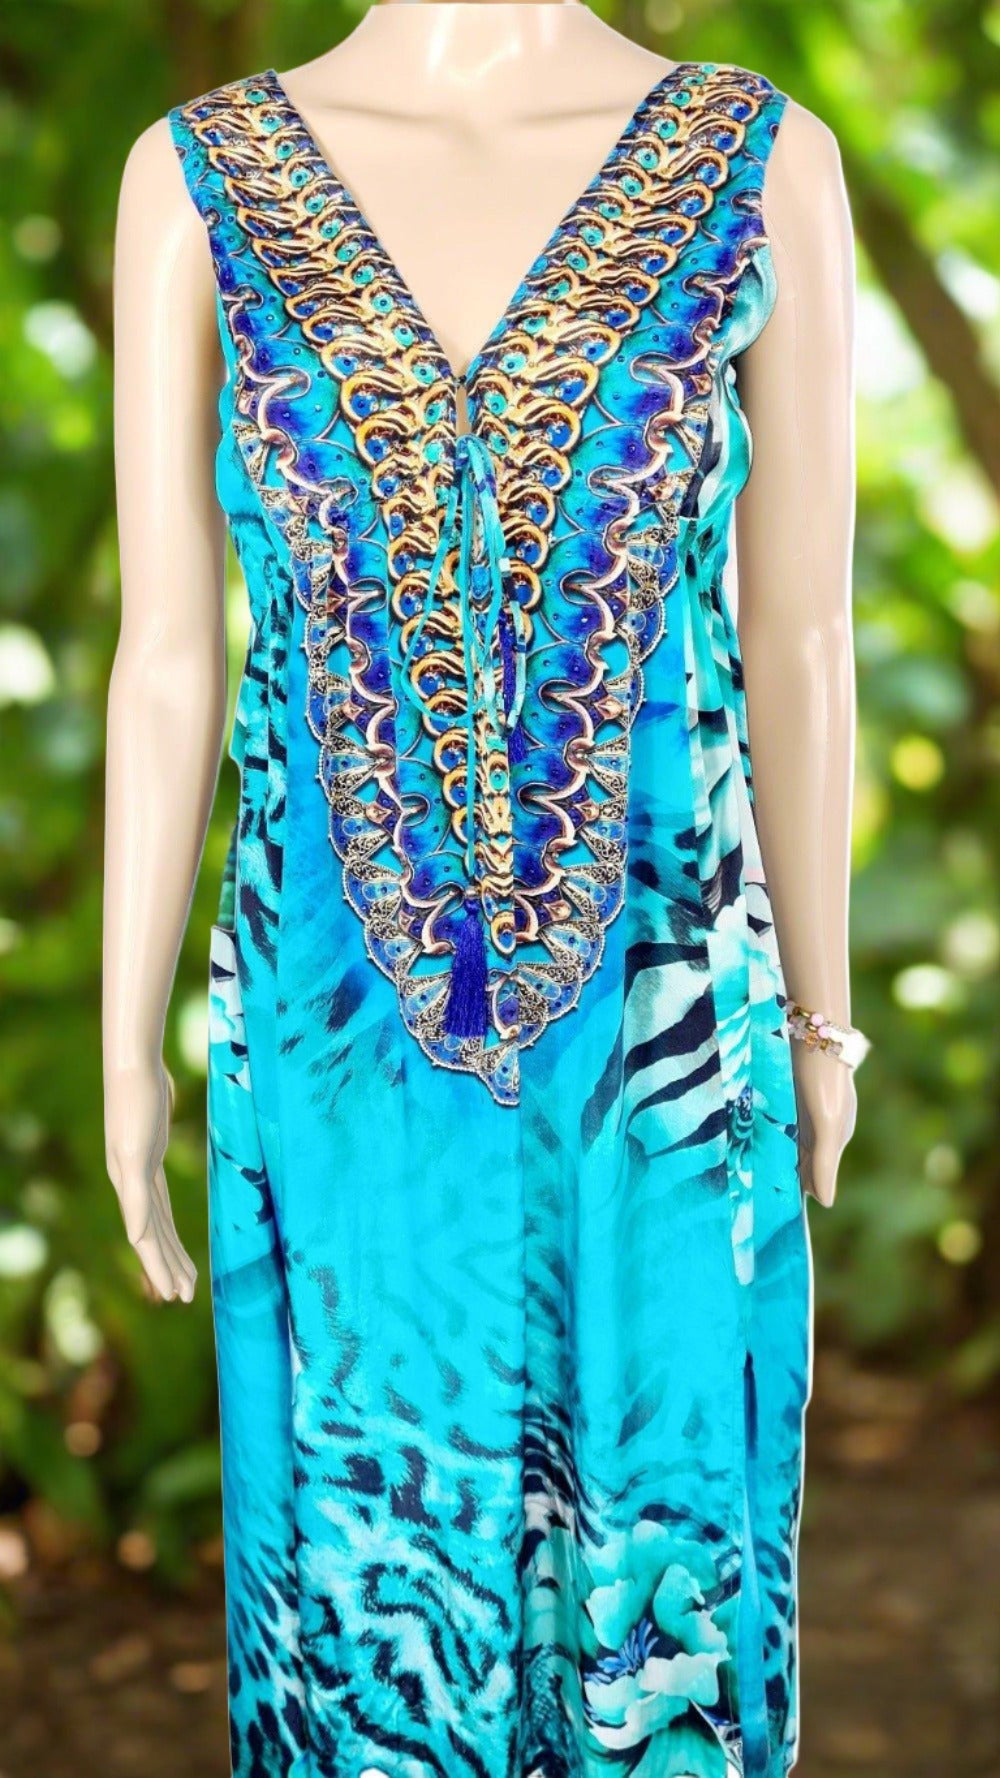 Into the Wild Front Split Maxi Dress - Kaftans that Bling